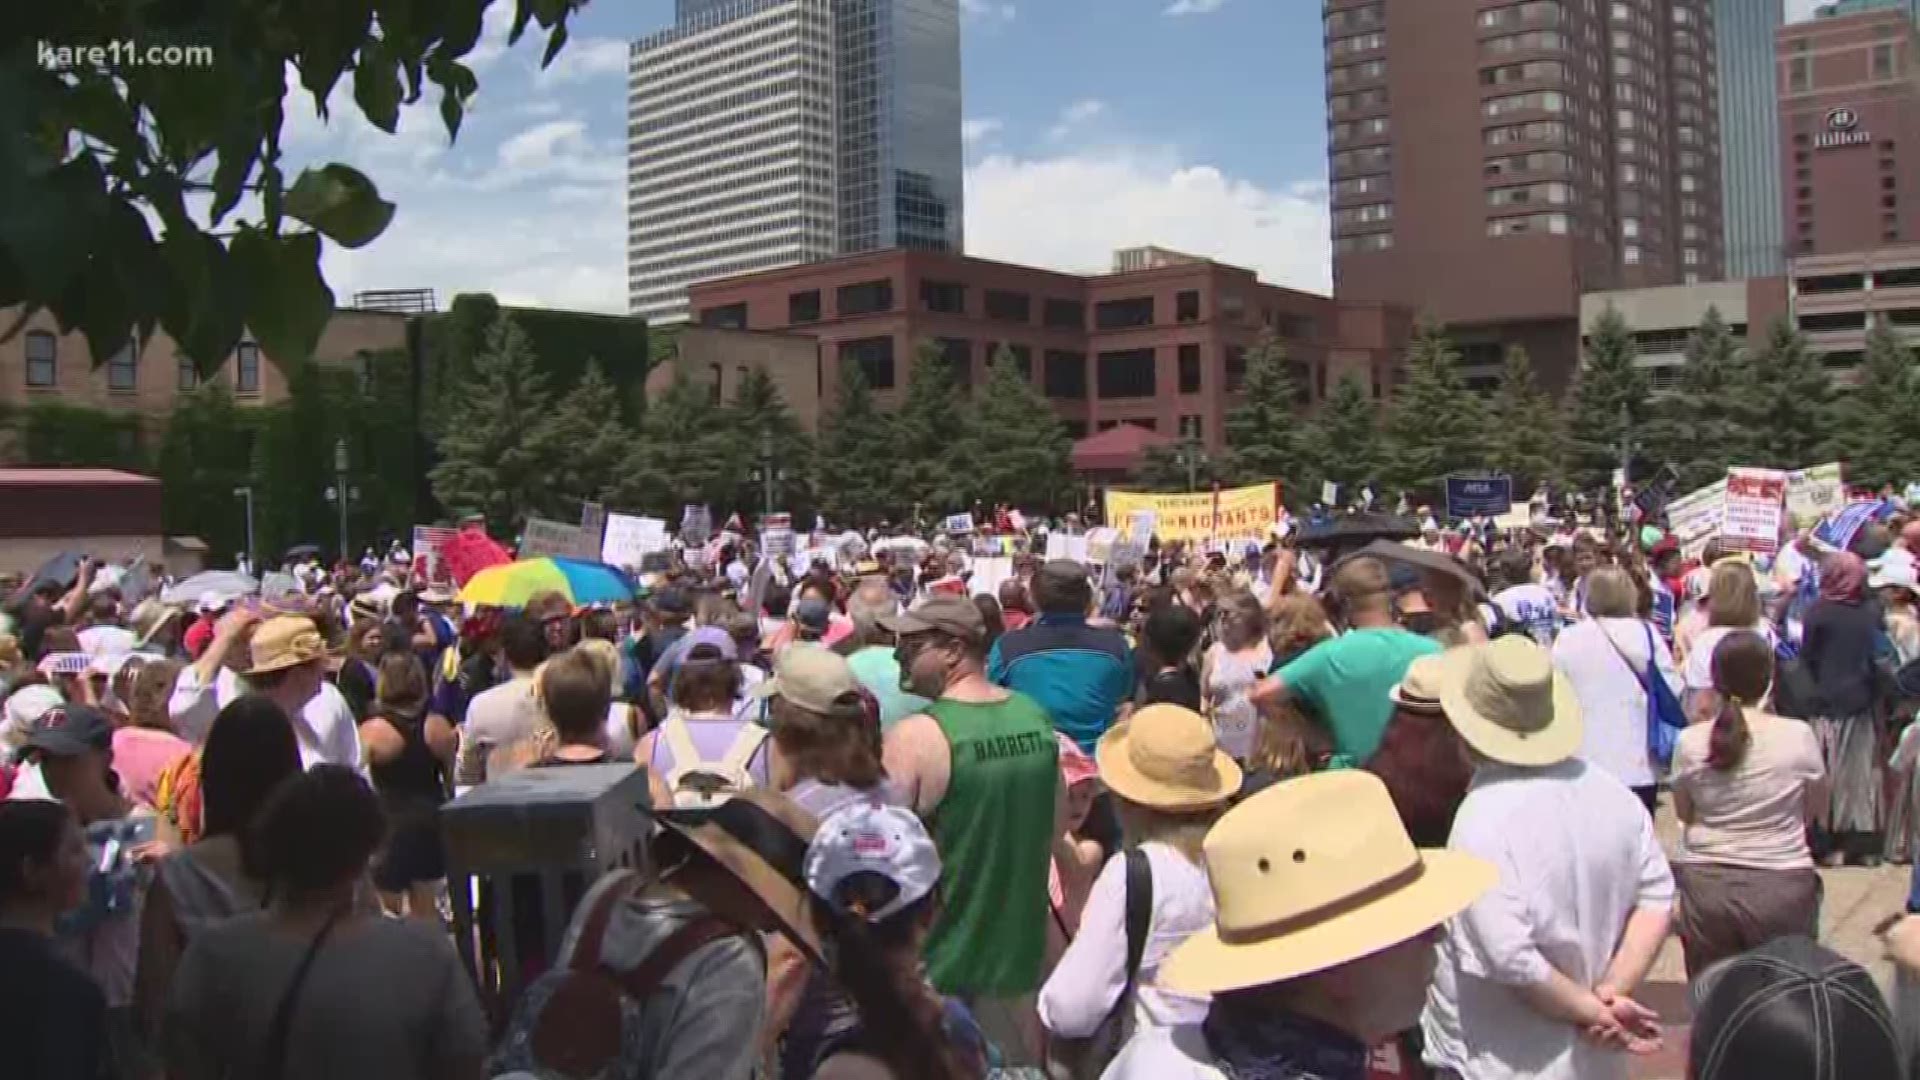 Protesters marched on June 30 against family separations at the southern border.